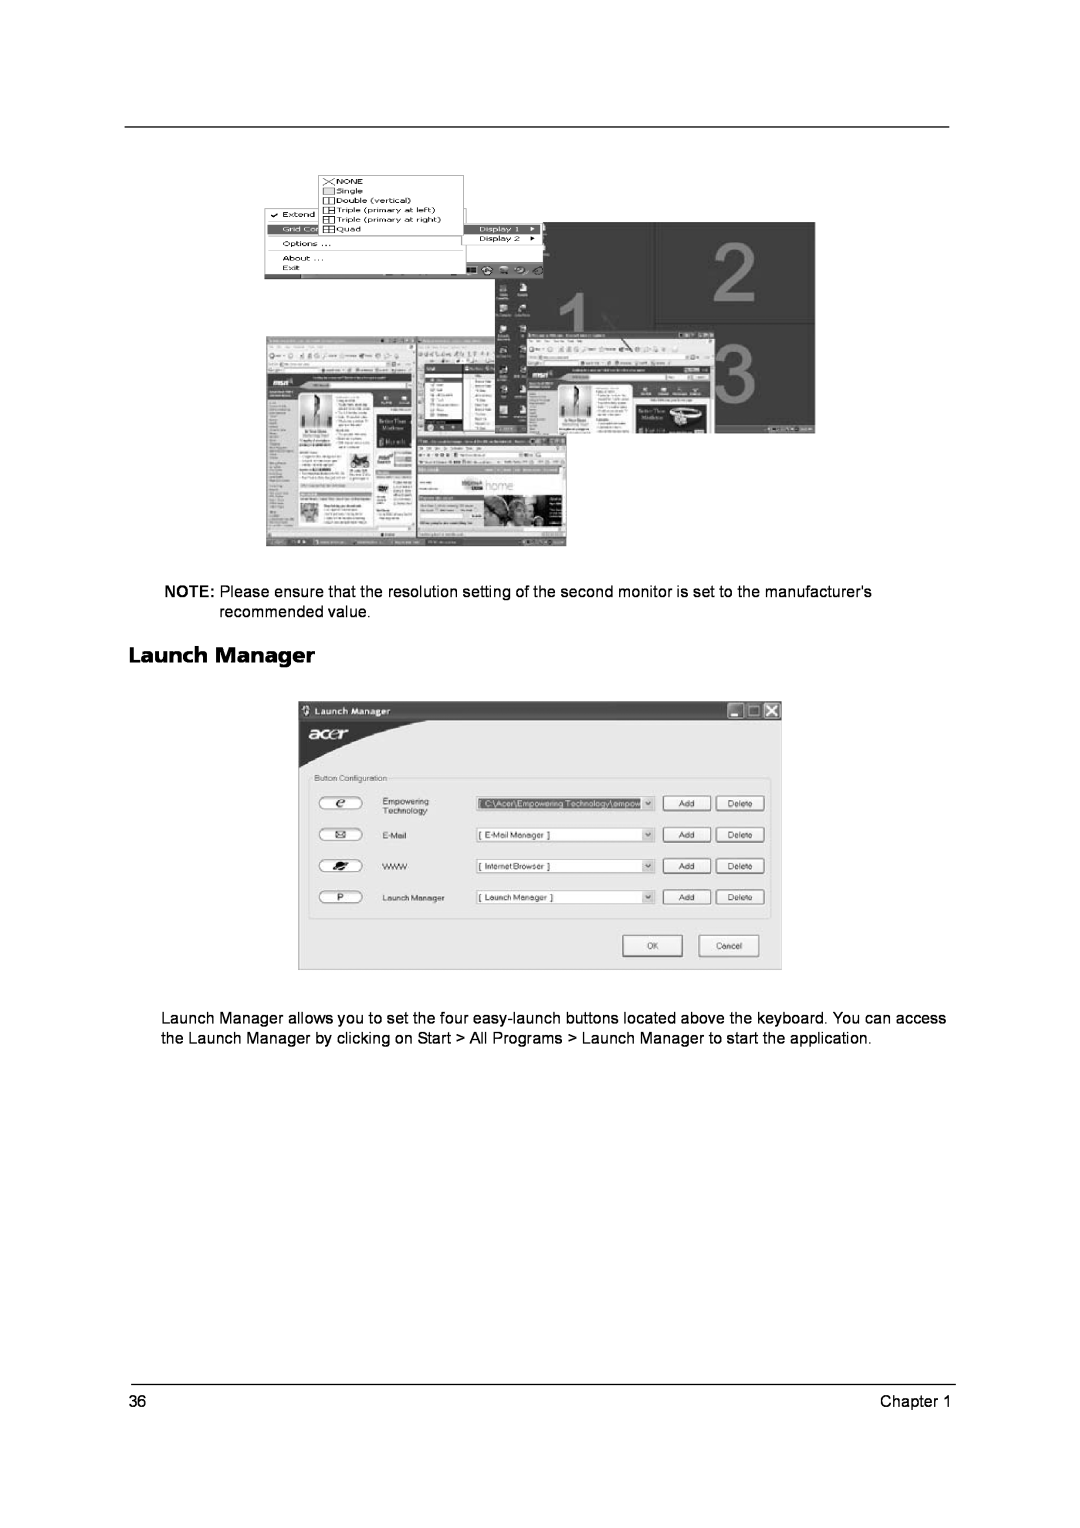 Acer 9800 manual Launch Manager 